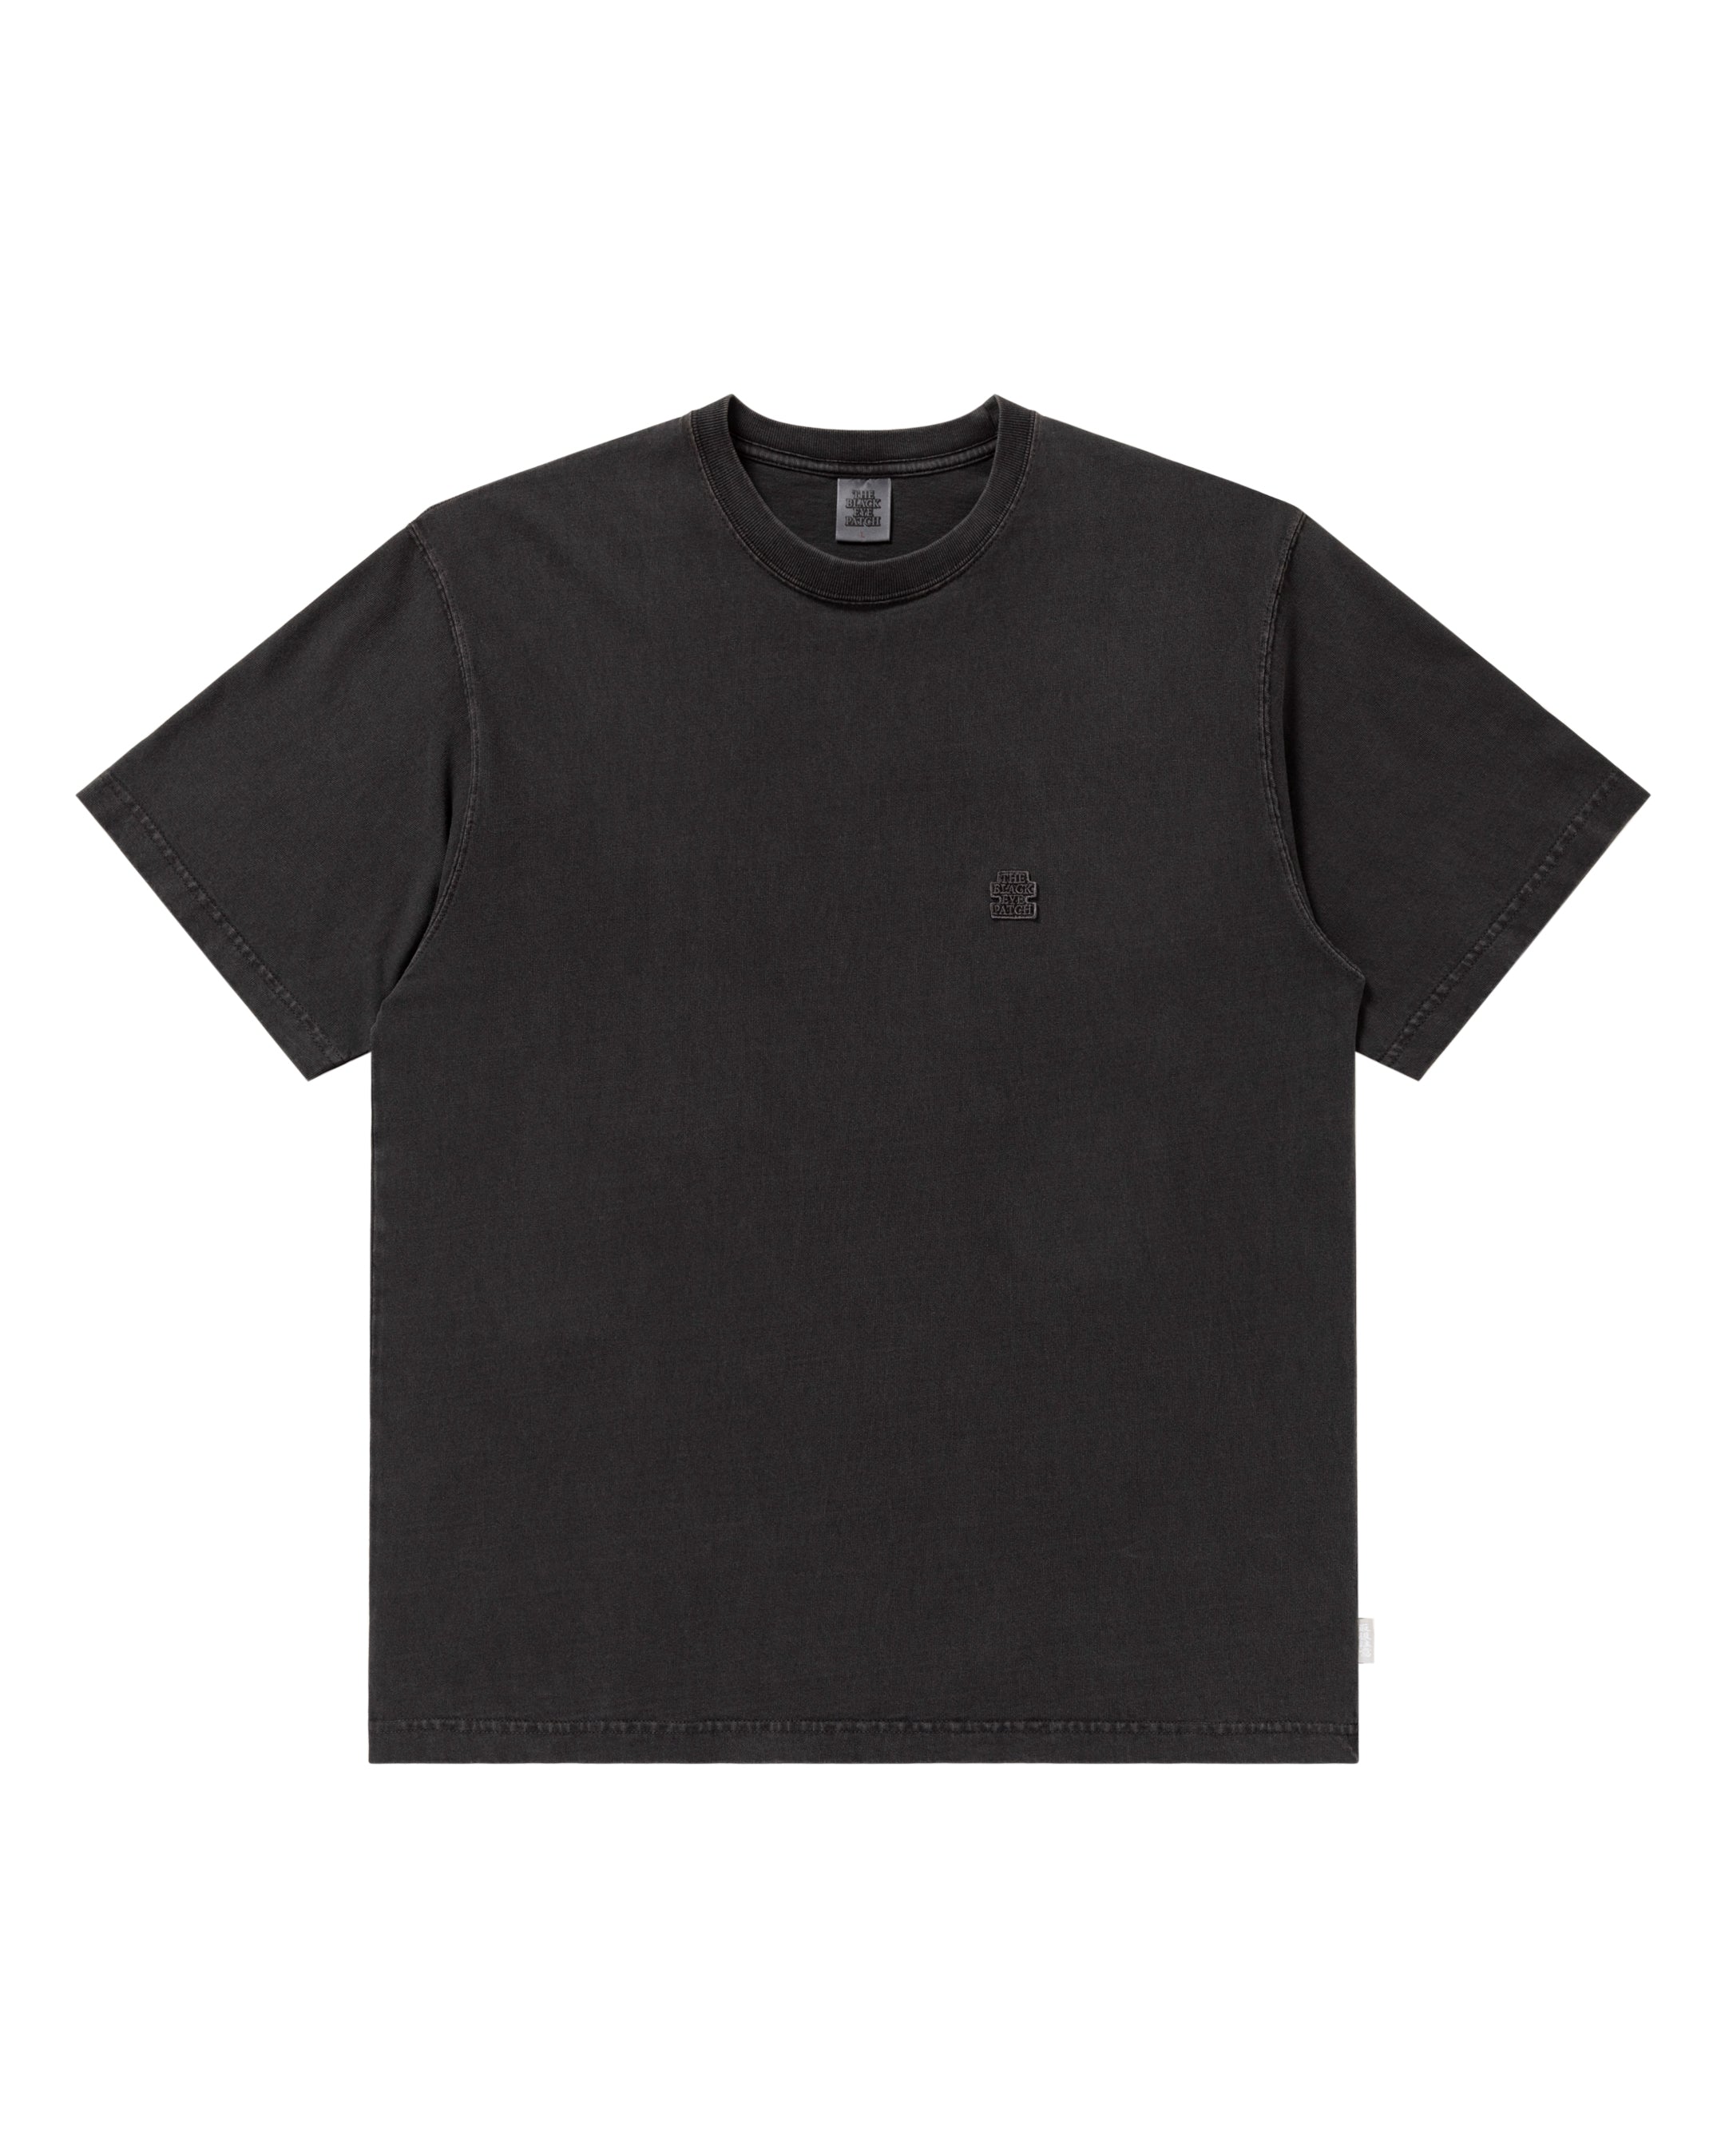 PIGMENT DYED SMALL OG LABEL TEE BLACK